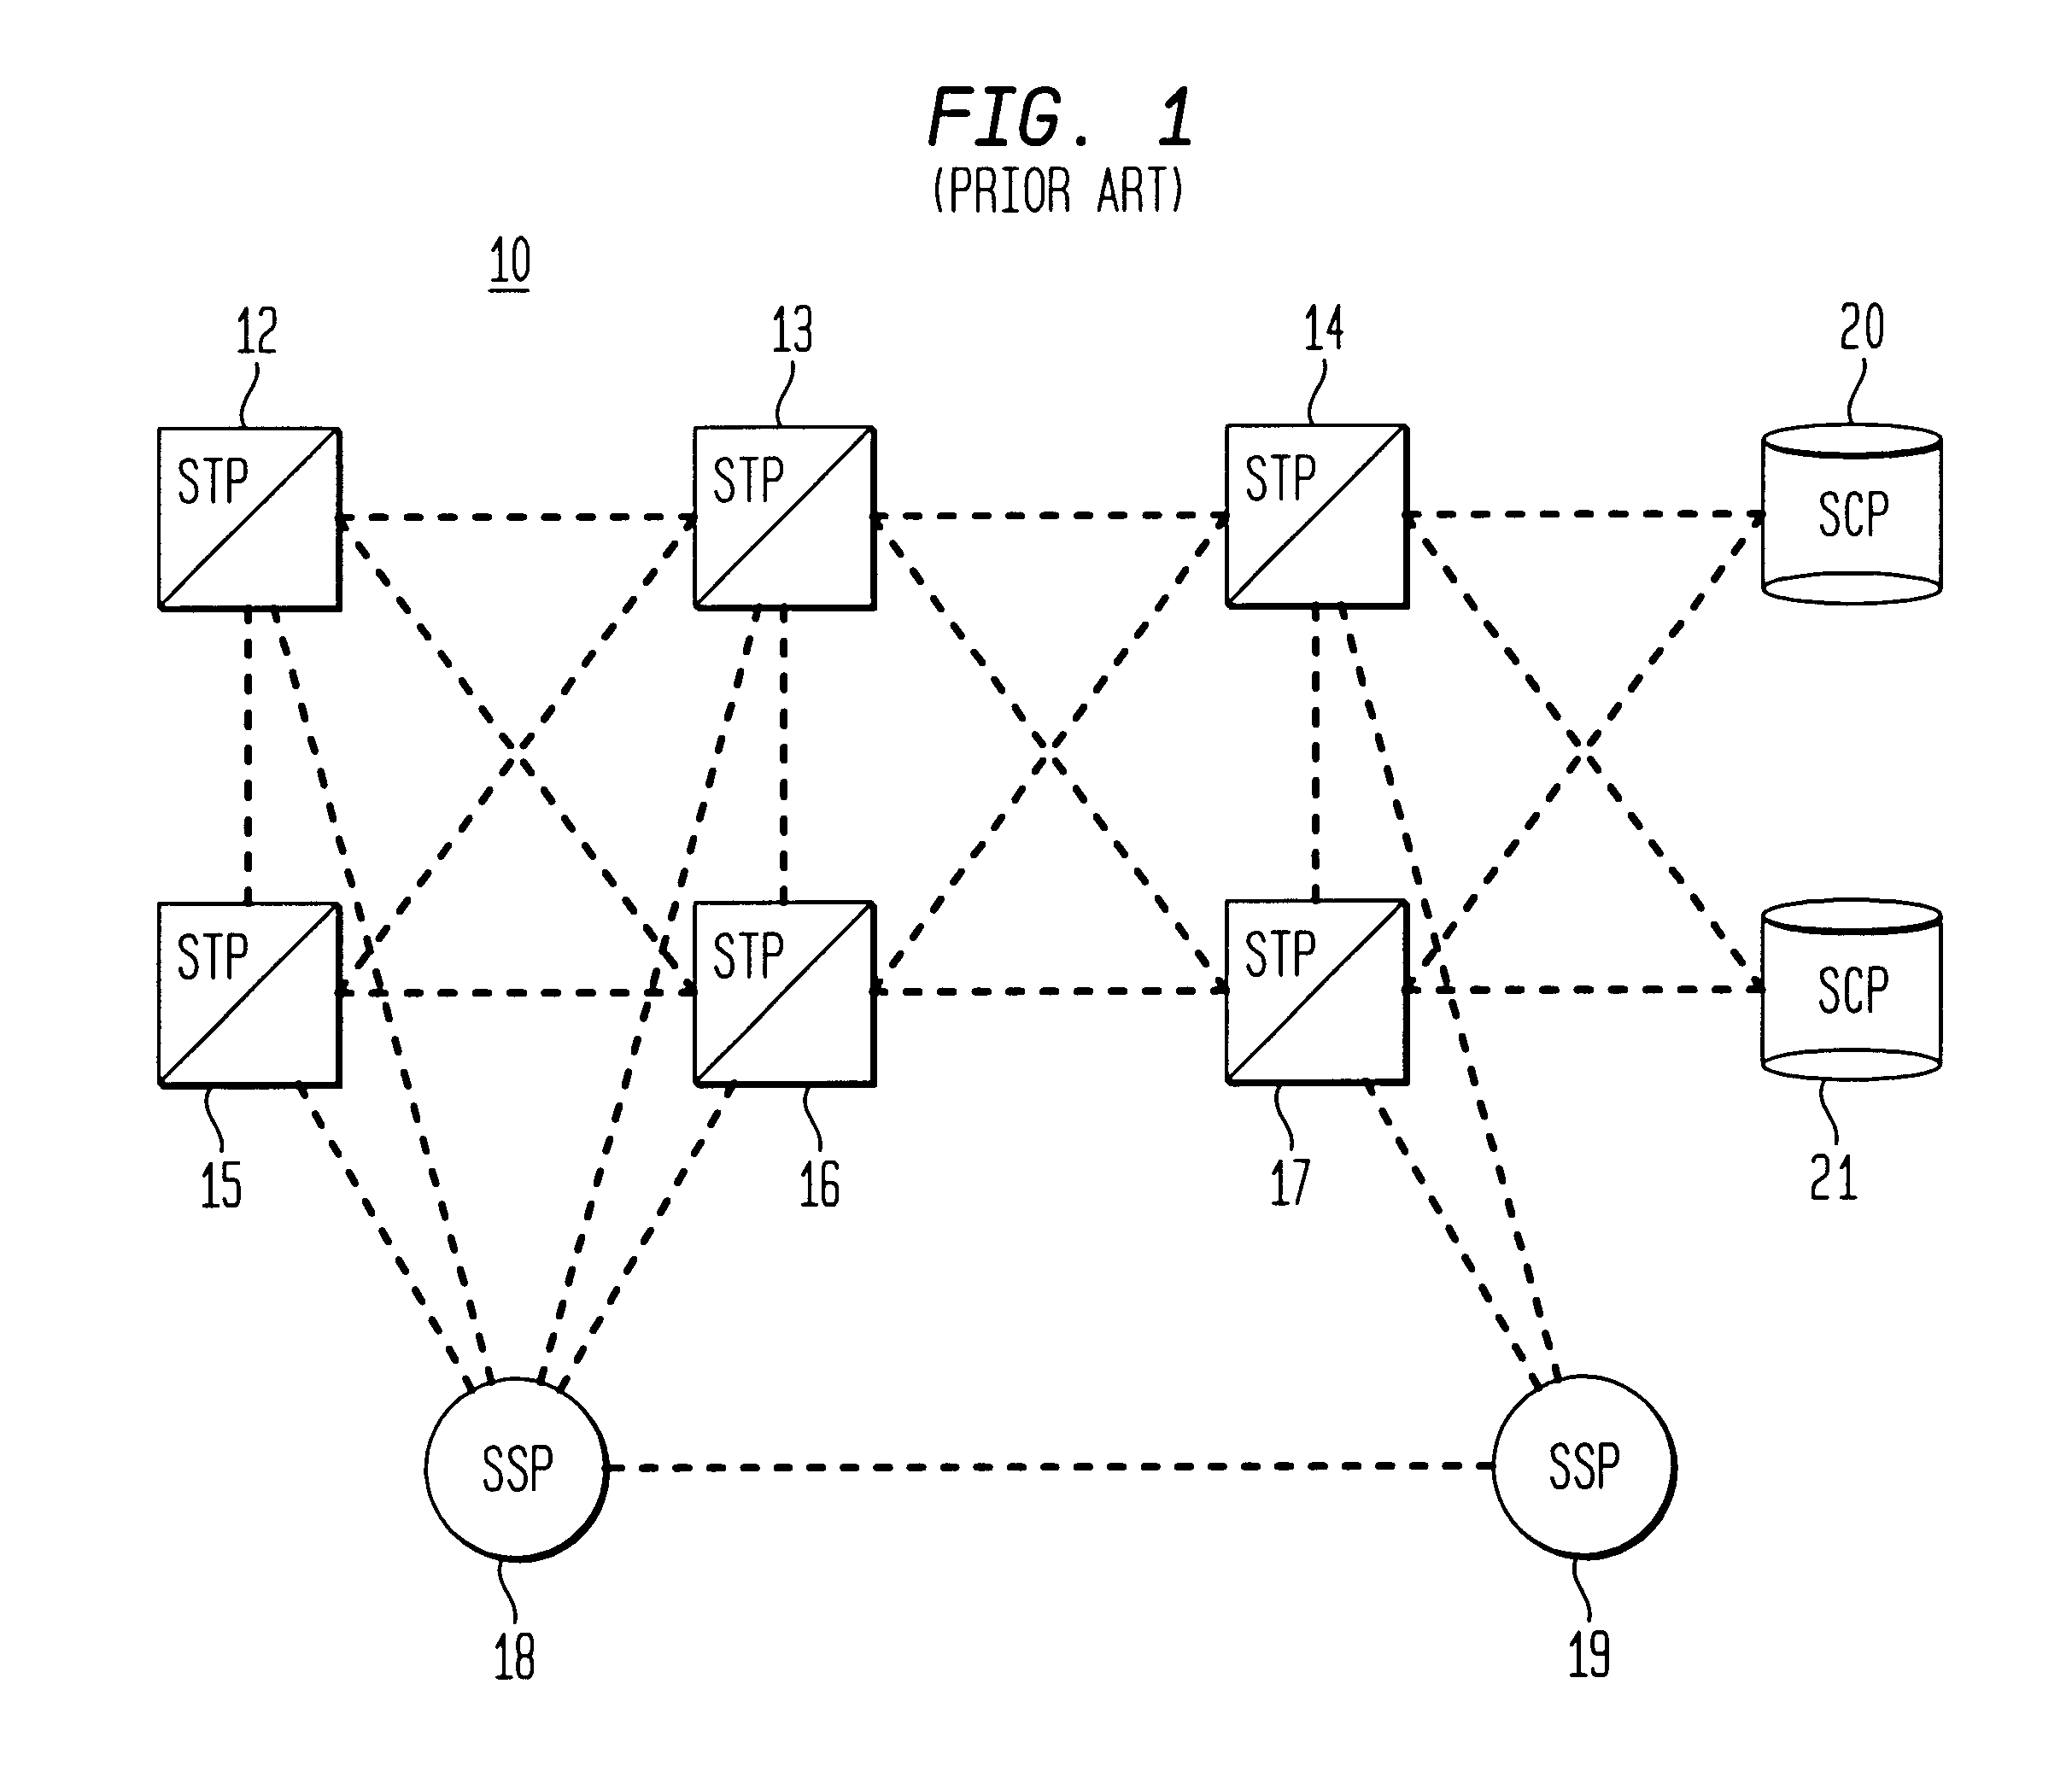 Intelligent network signaling using an open system protocol